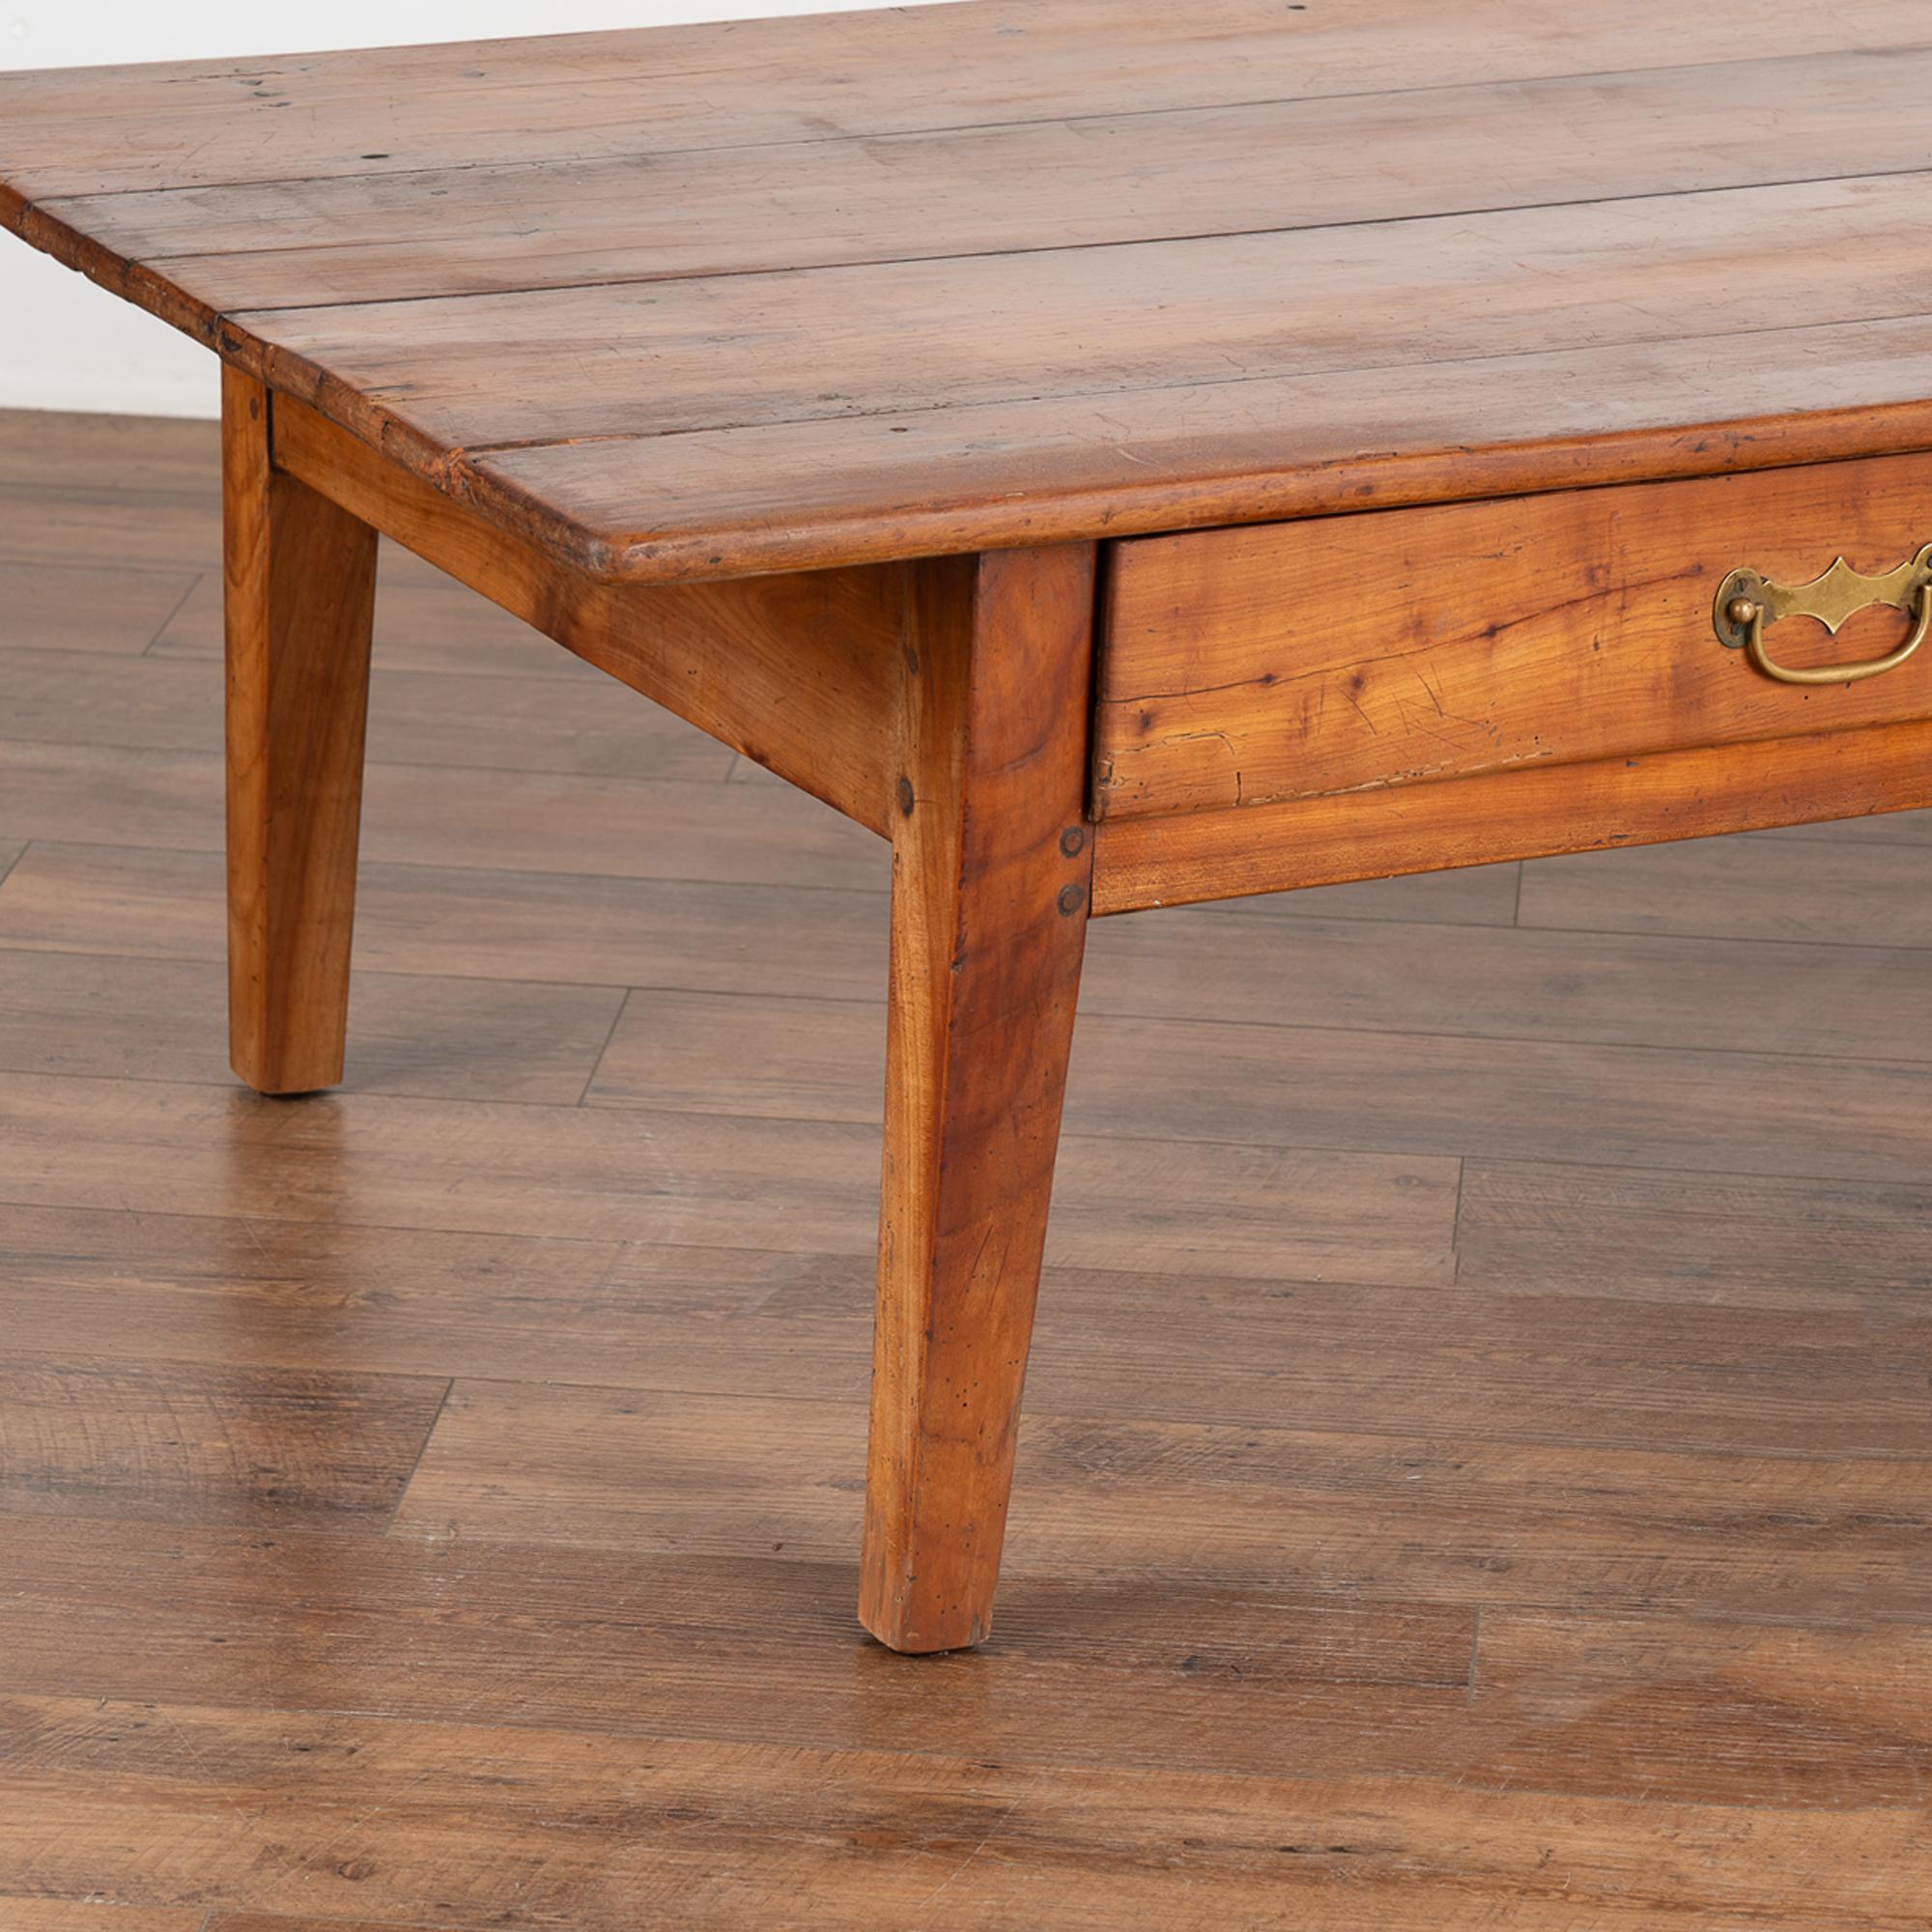 Large French Country Cherry Wood Coffee Table, circa 1820-40 2